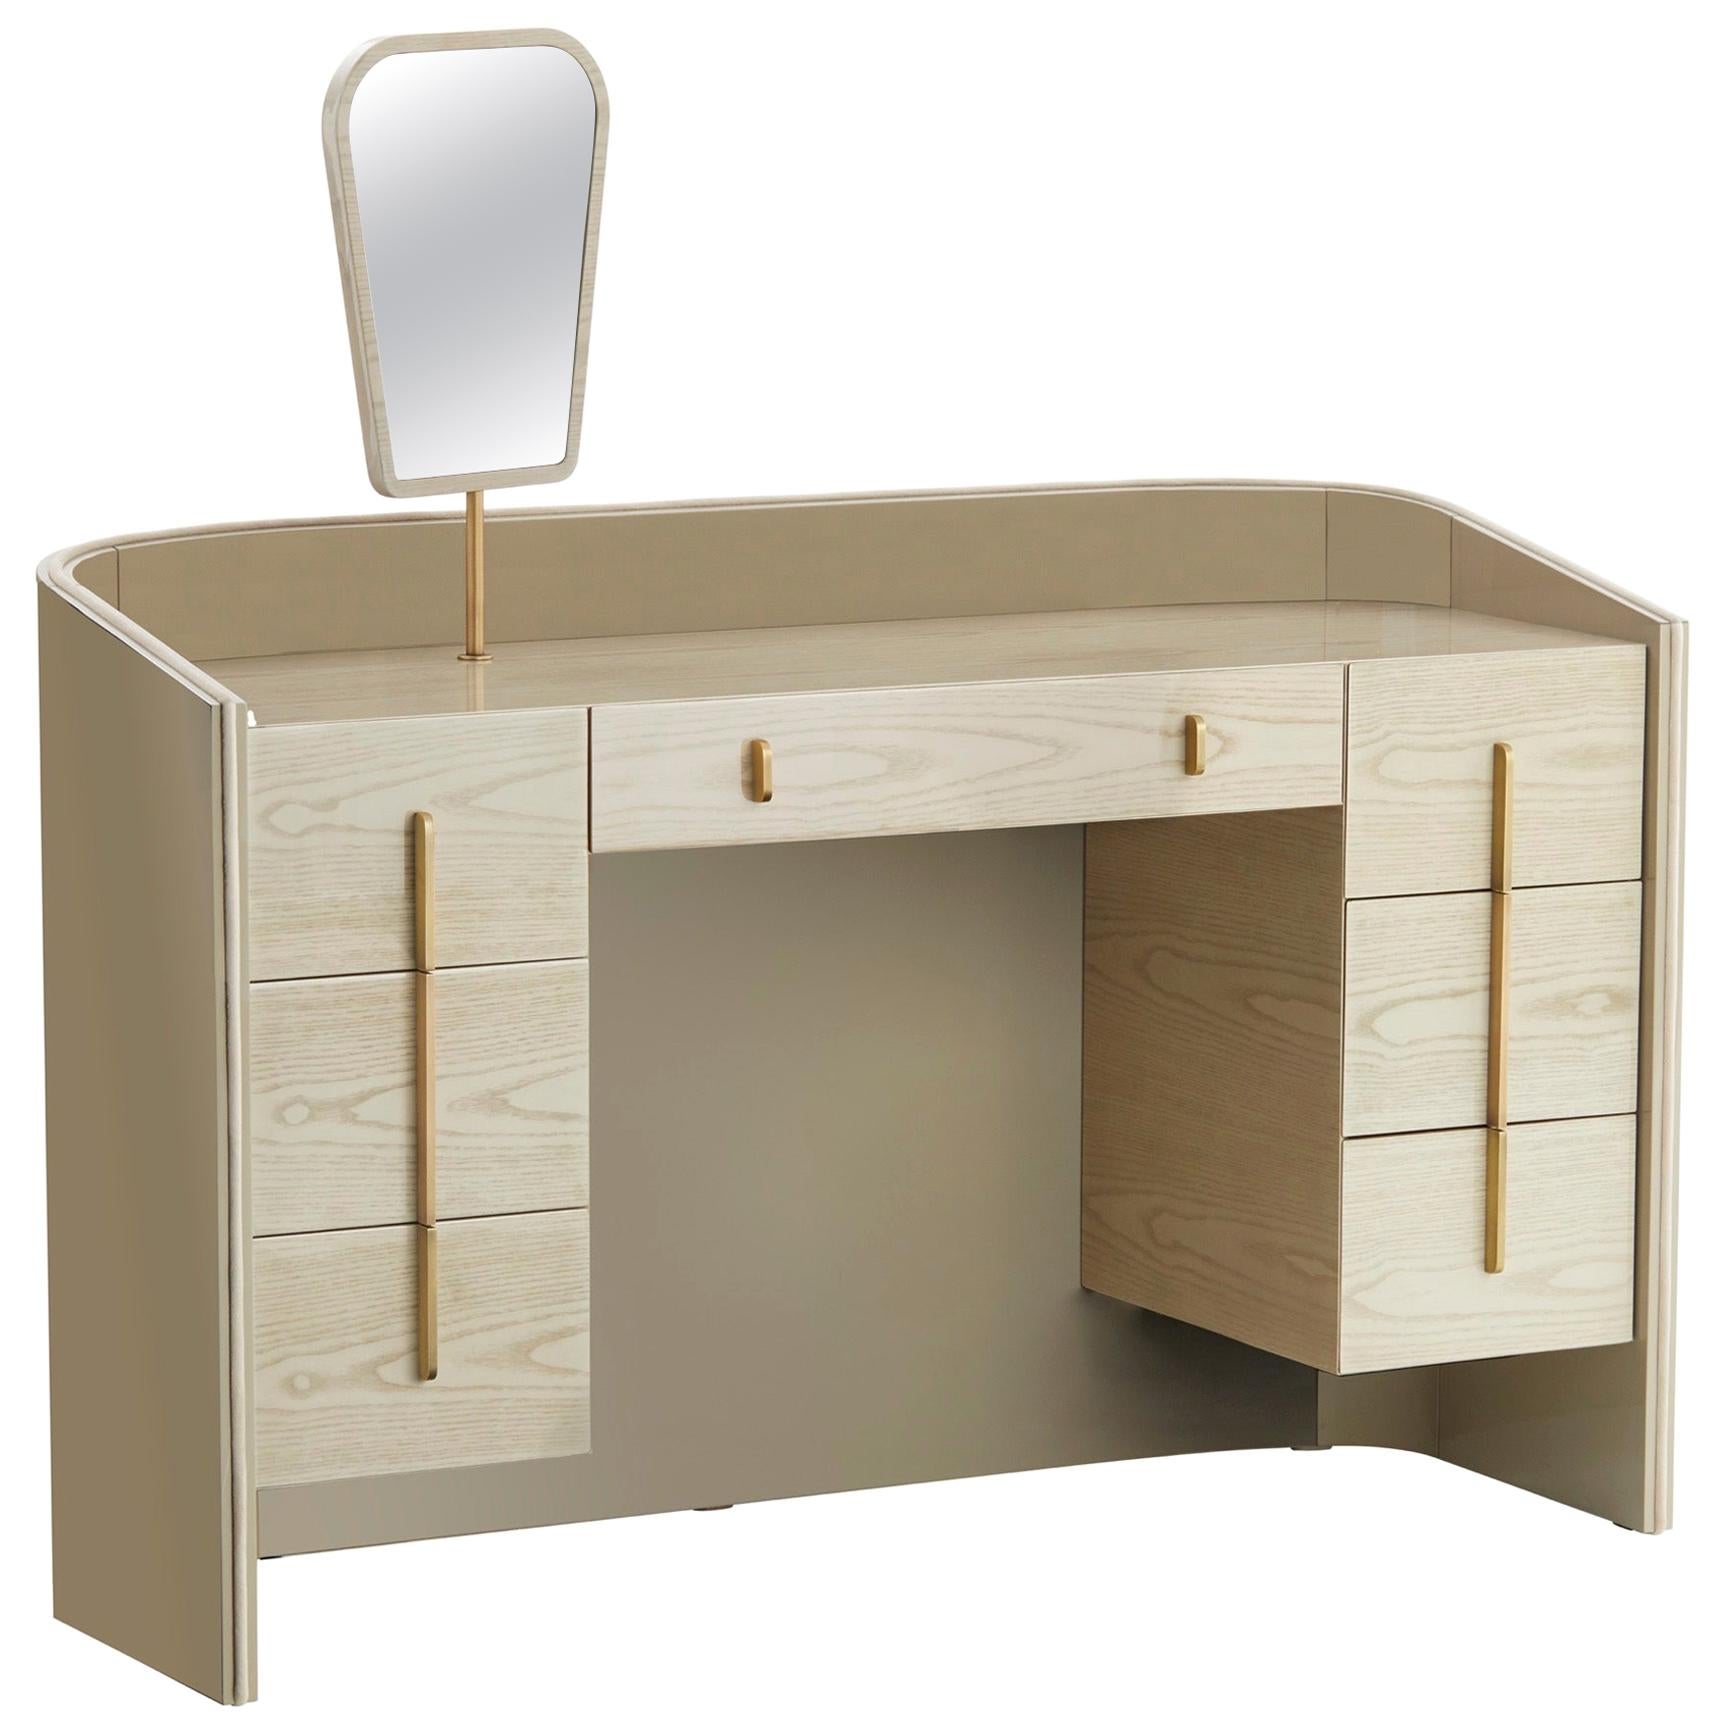 CORALINA dressing table with Ash Avelana Drawers and Antique Brass Handles